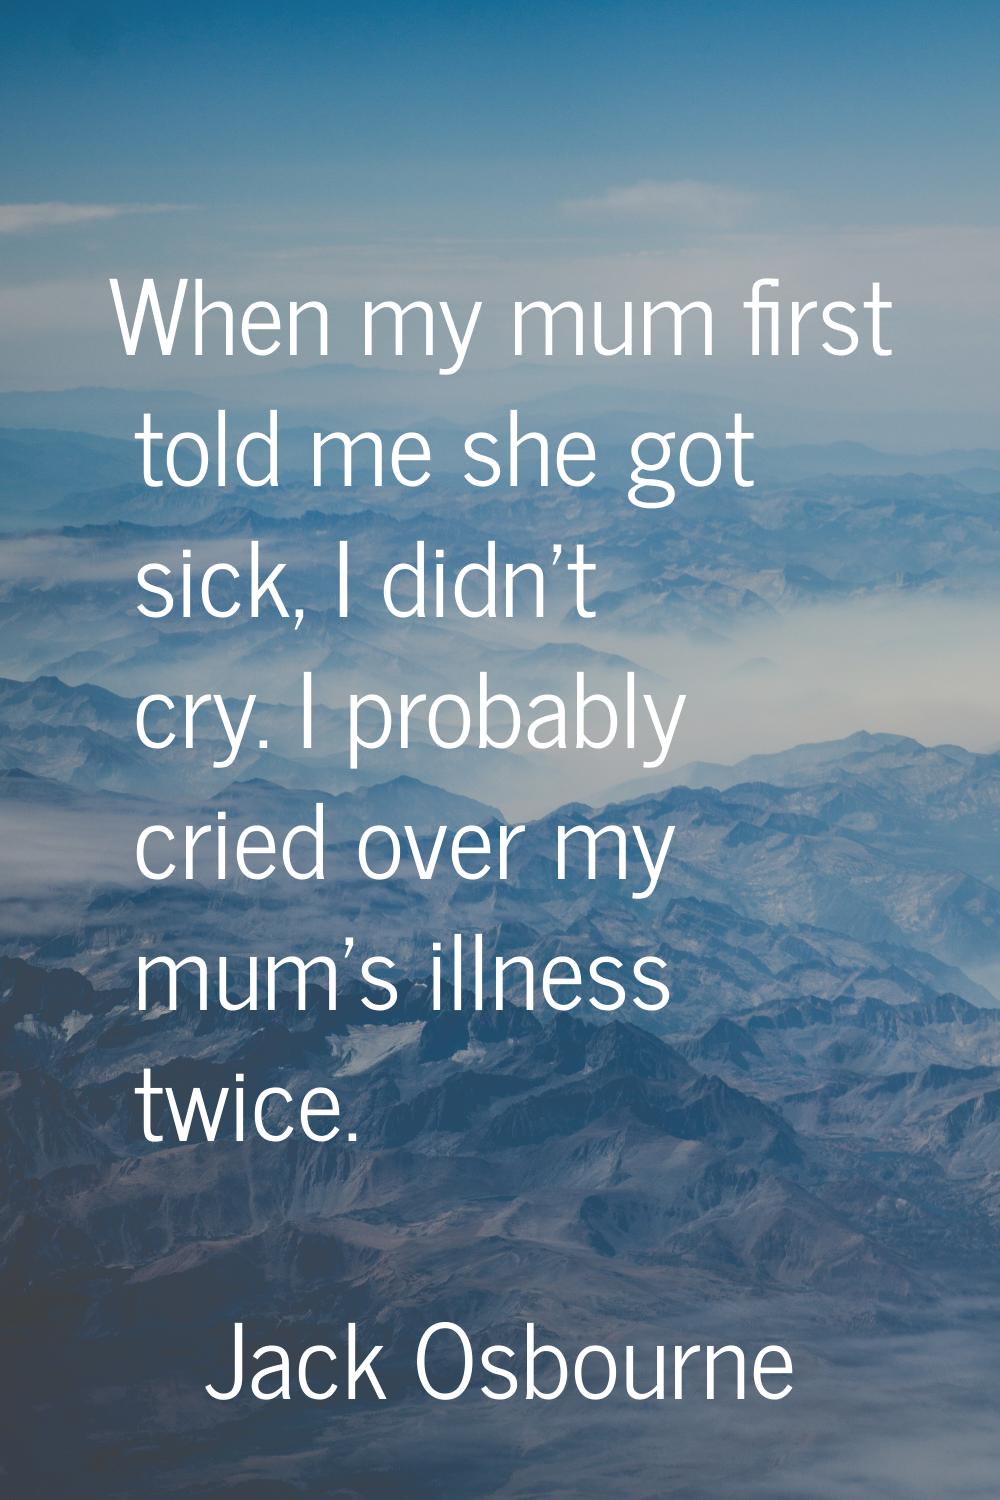 When my mum first told me she got sick, I didn't cry. I probably cried over my mum's illness twice.